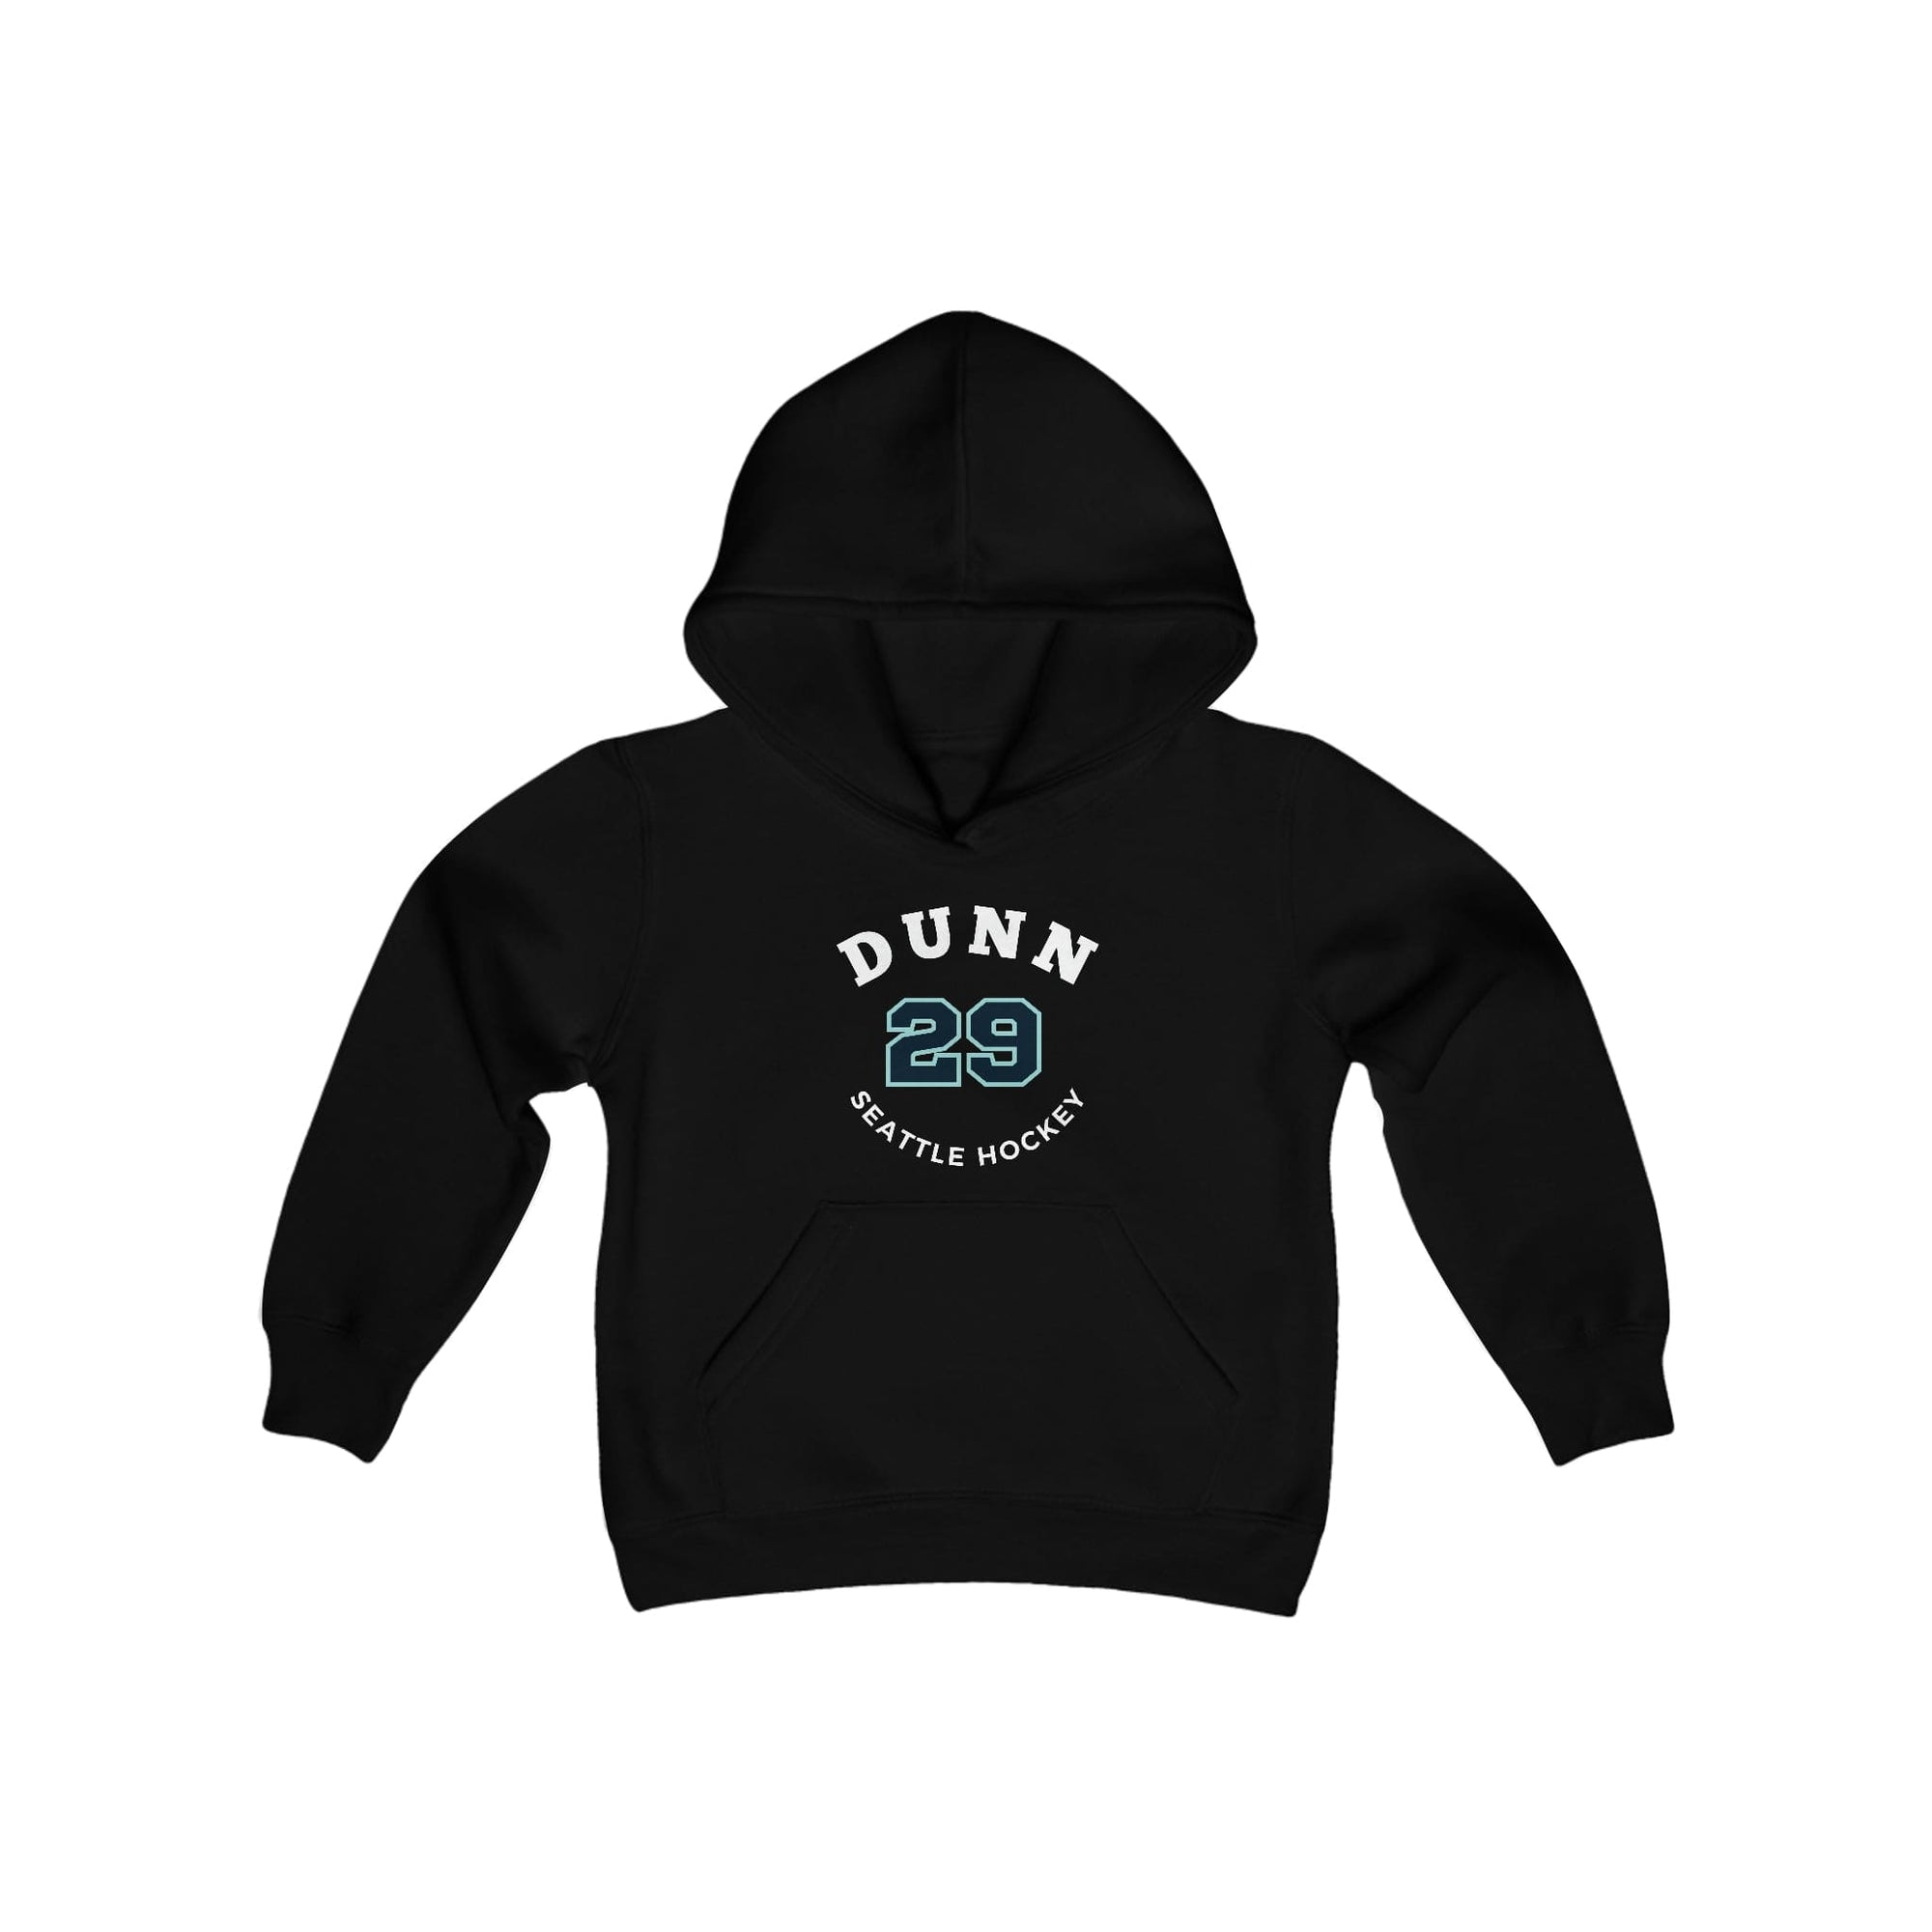 Kids clothes Dunn 29 Seattle Hockey Number Arch Design Youth Hooded Sweatshirt